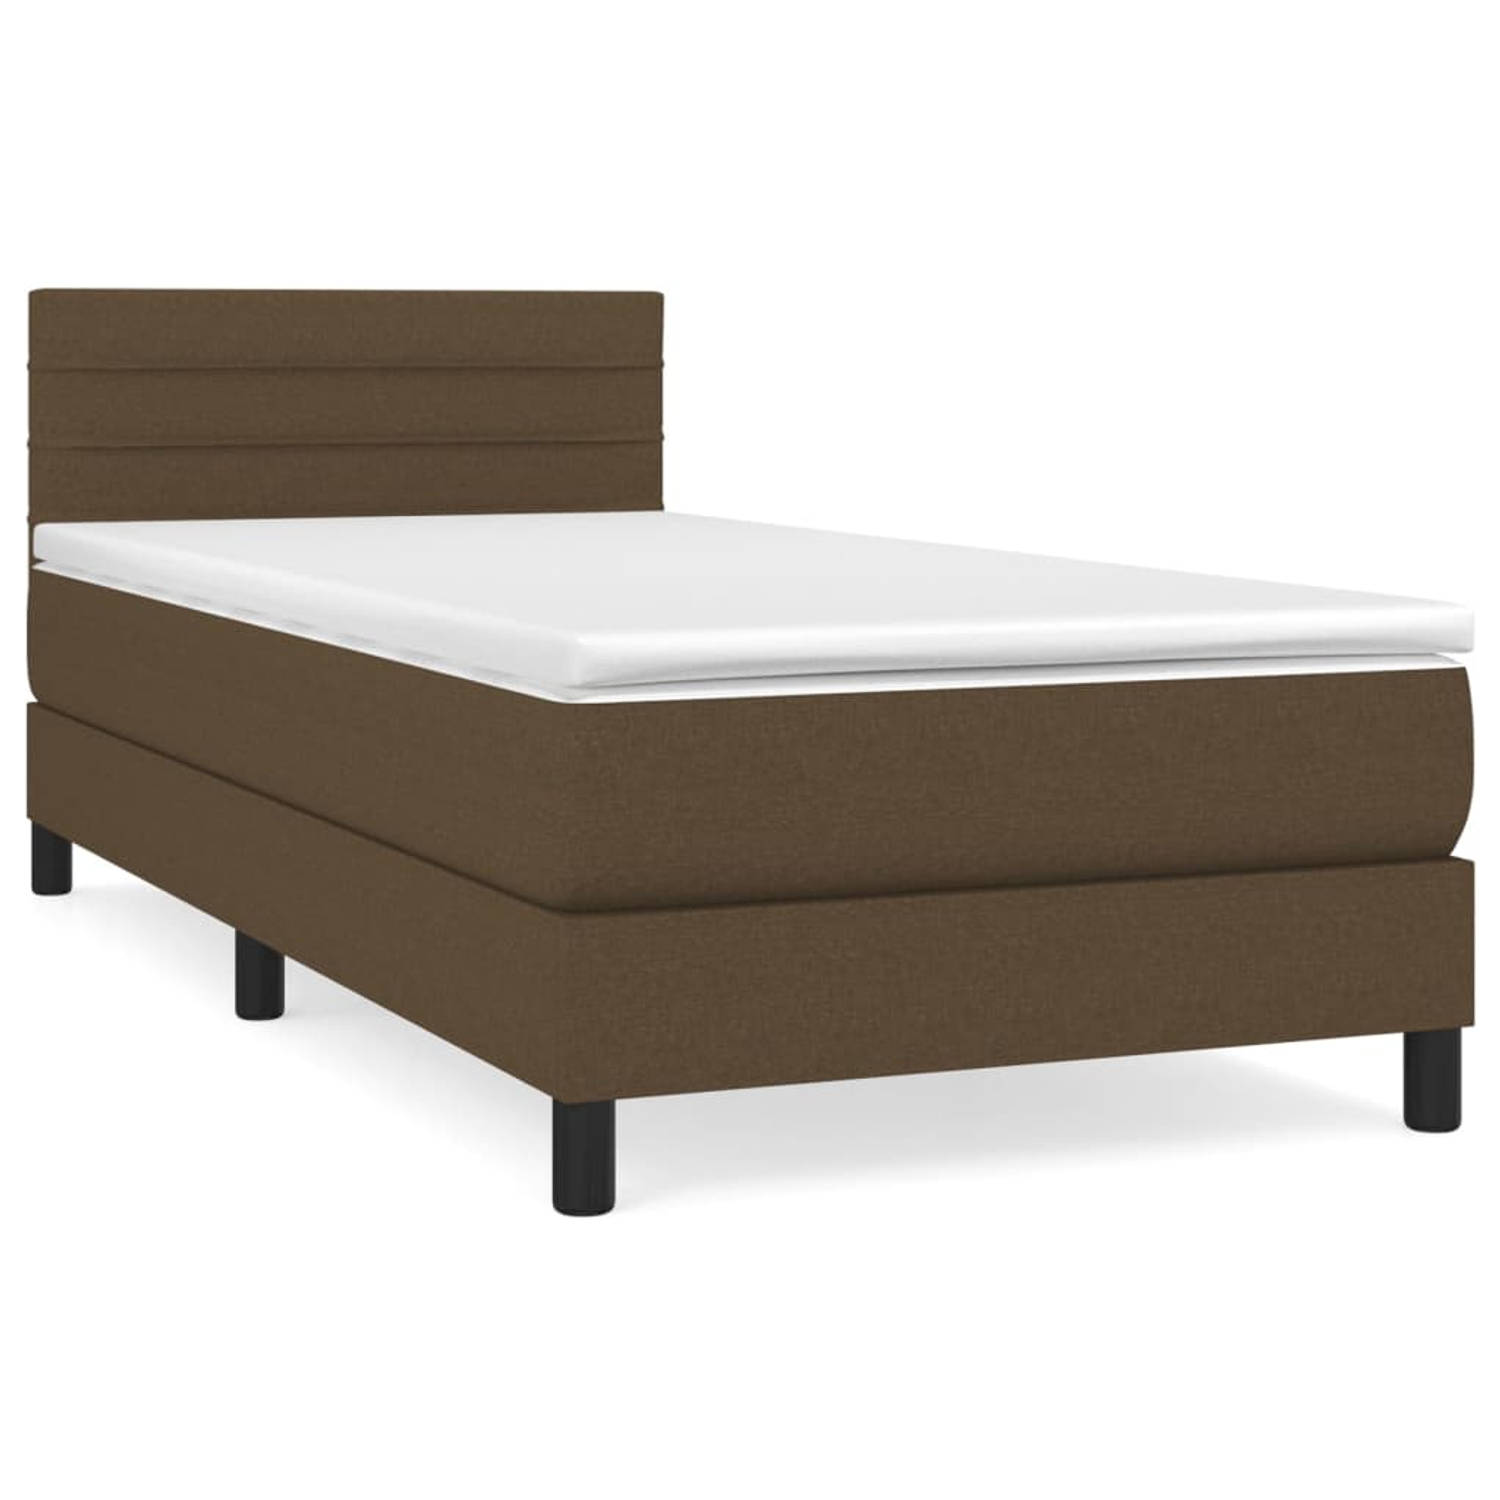 The Living Store Boxspringbed - Bed - 203 x 100 x 78/88 cm - donkerbruin - stof (100% polyester) - verstelbaar